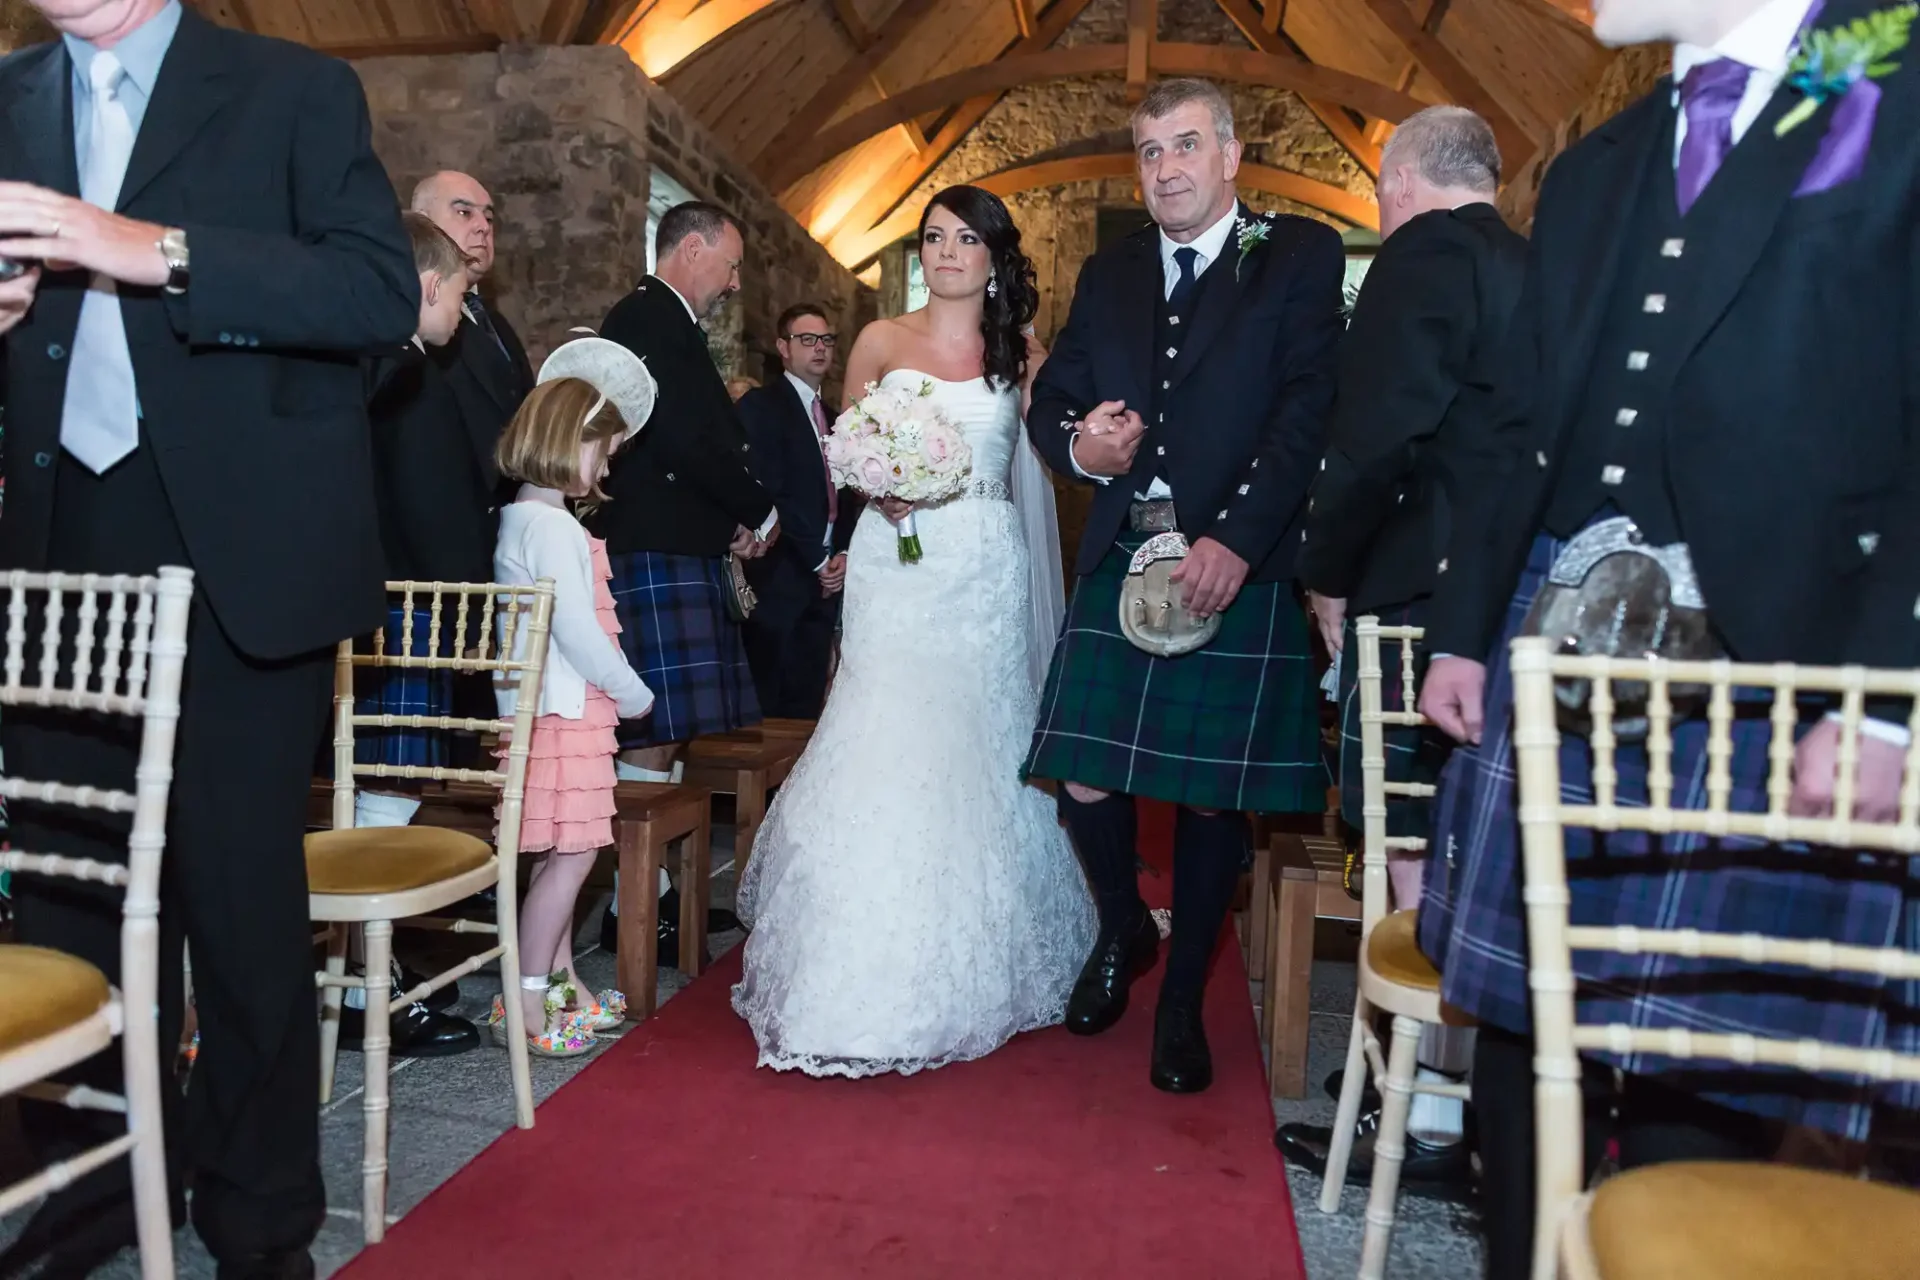 A bride in a white dress and her father wearing a kilt walk down the aisle in a stone chapel filled with guests.